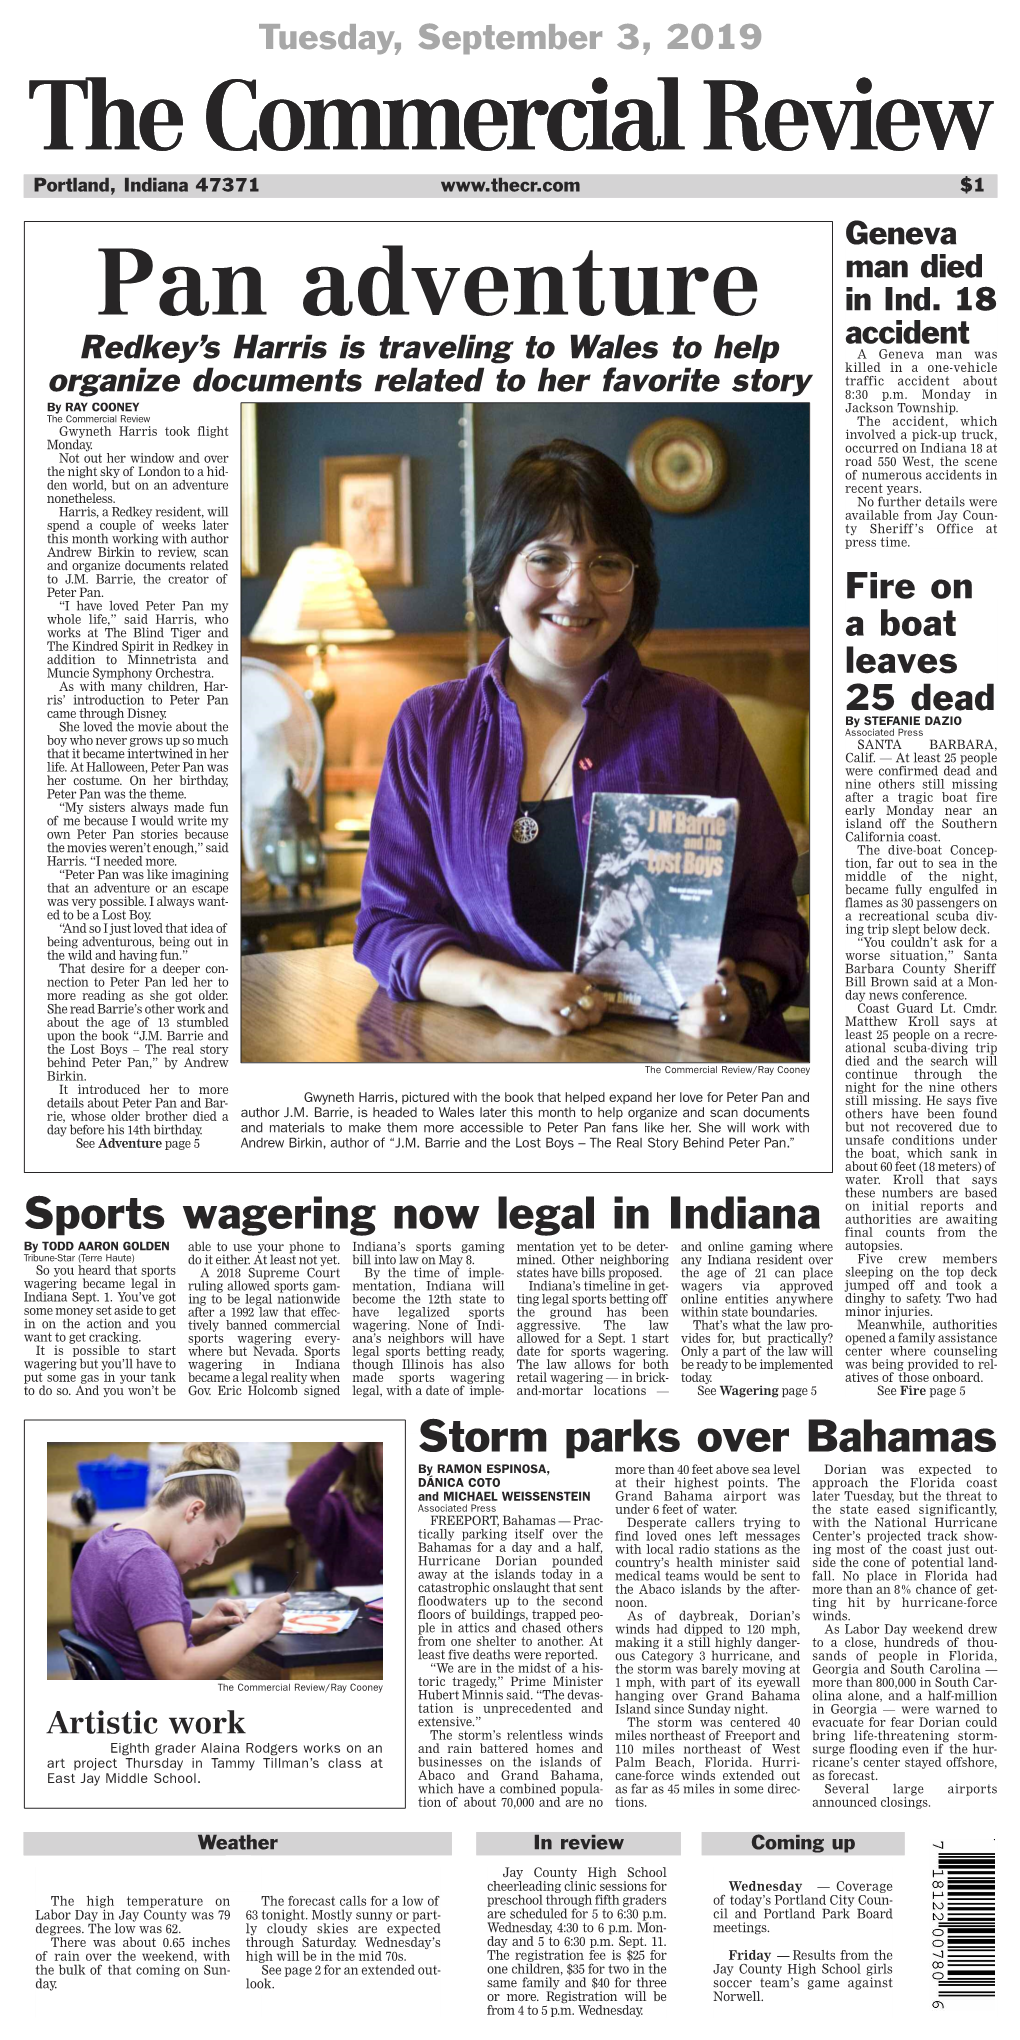 Storm Parks Over Bahamas Sports Wagering Now Legal in Indiana